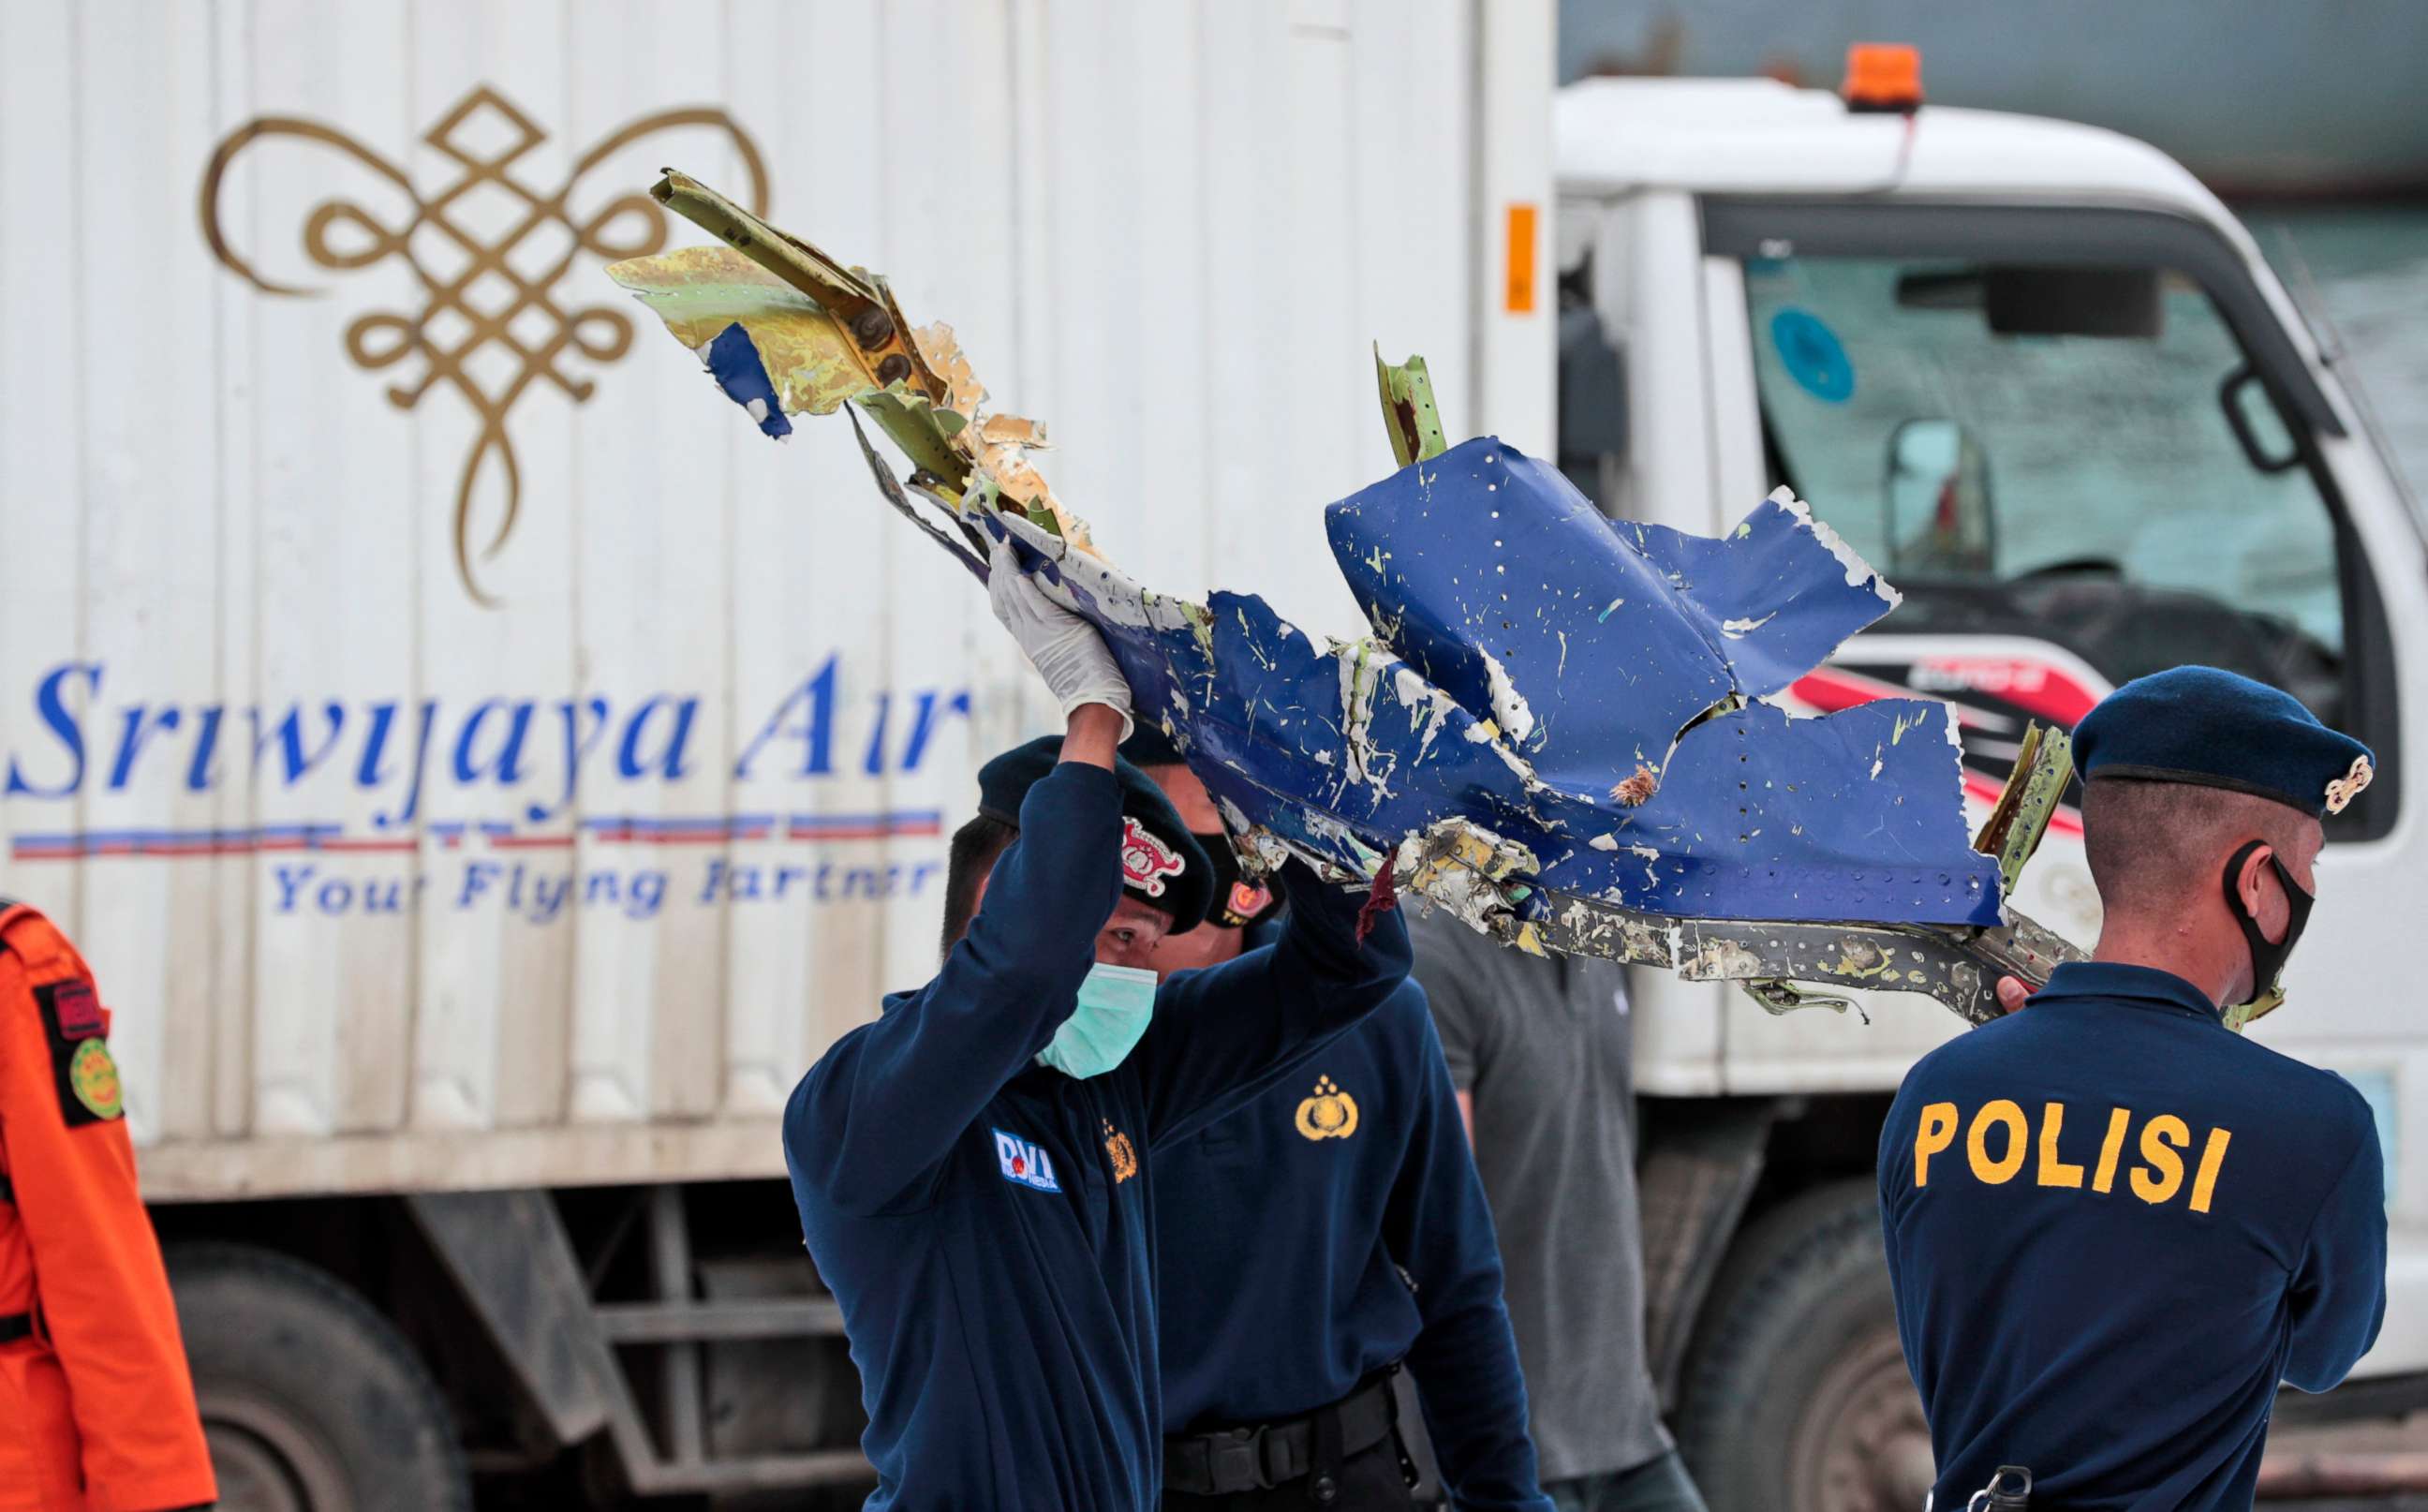 PHOTO: Indonesian police officers carry a part of an aircraft recovered from the Java Sea, where a Sriwijaya Air passenger jet crashed, at the Port of Tanjung Priok in Jakarta, Indonesia, on Jan. 11, 2021.